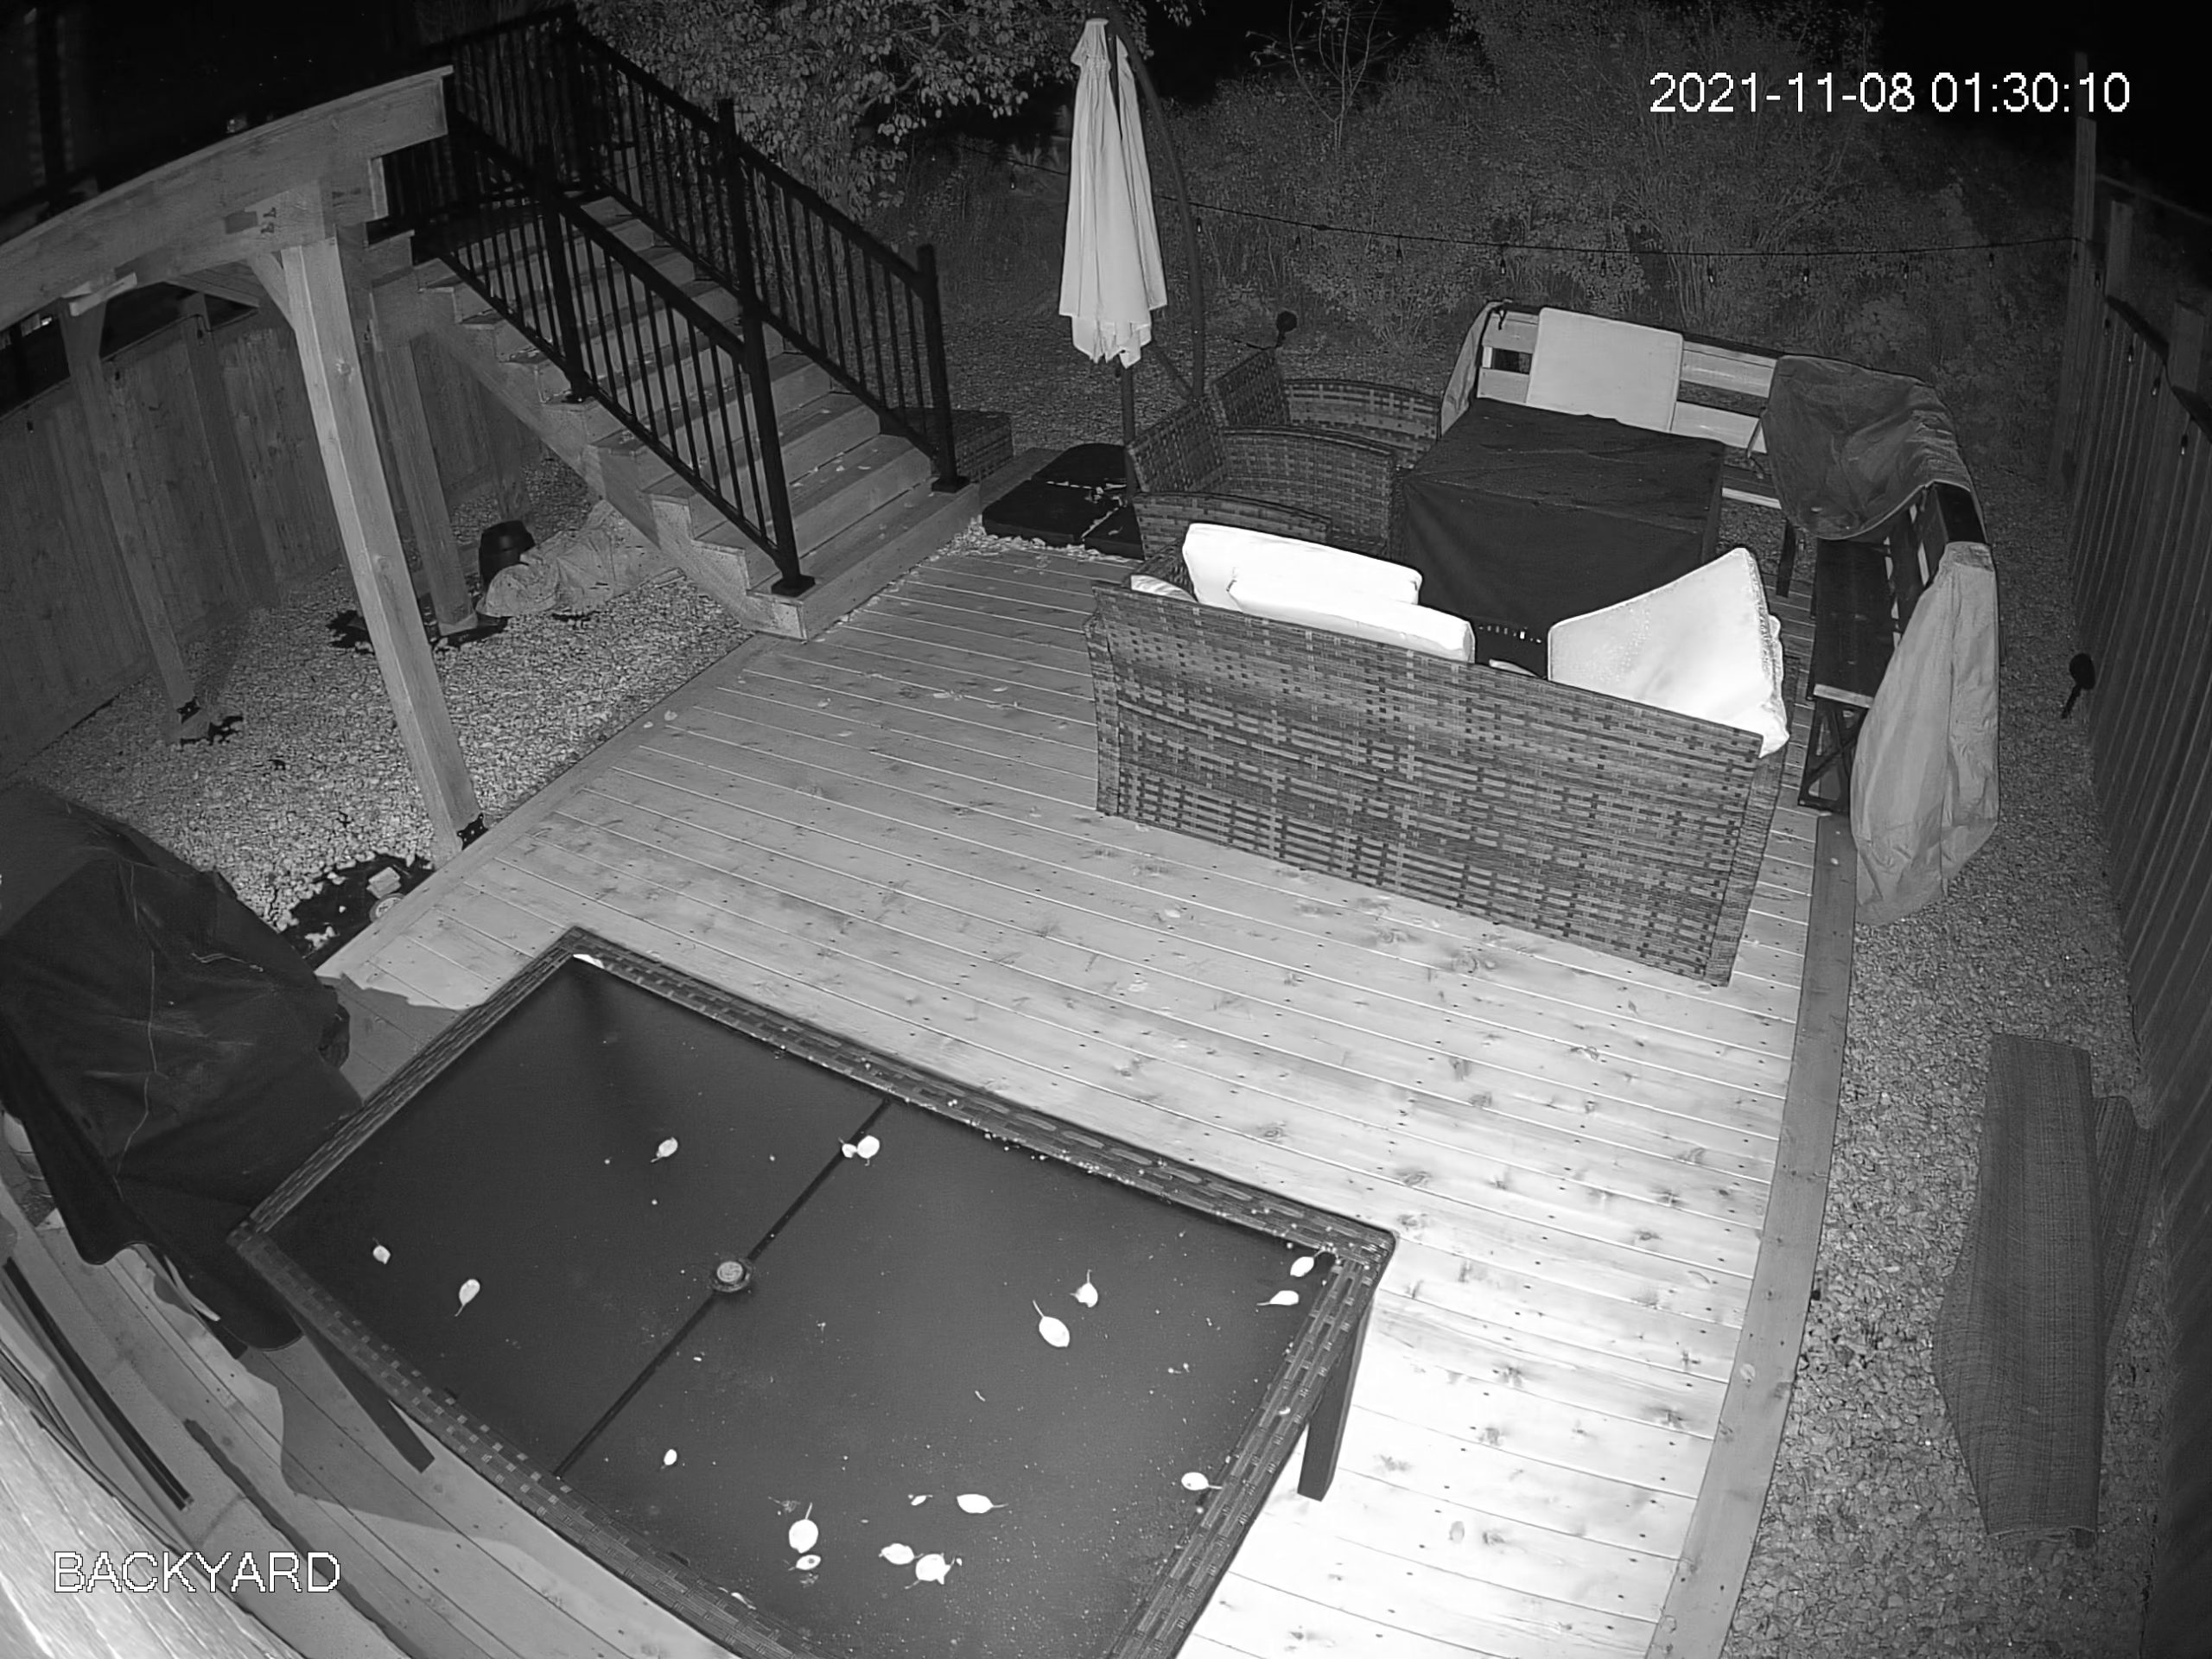 2K Security Camera Night Vision Picture Quality